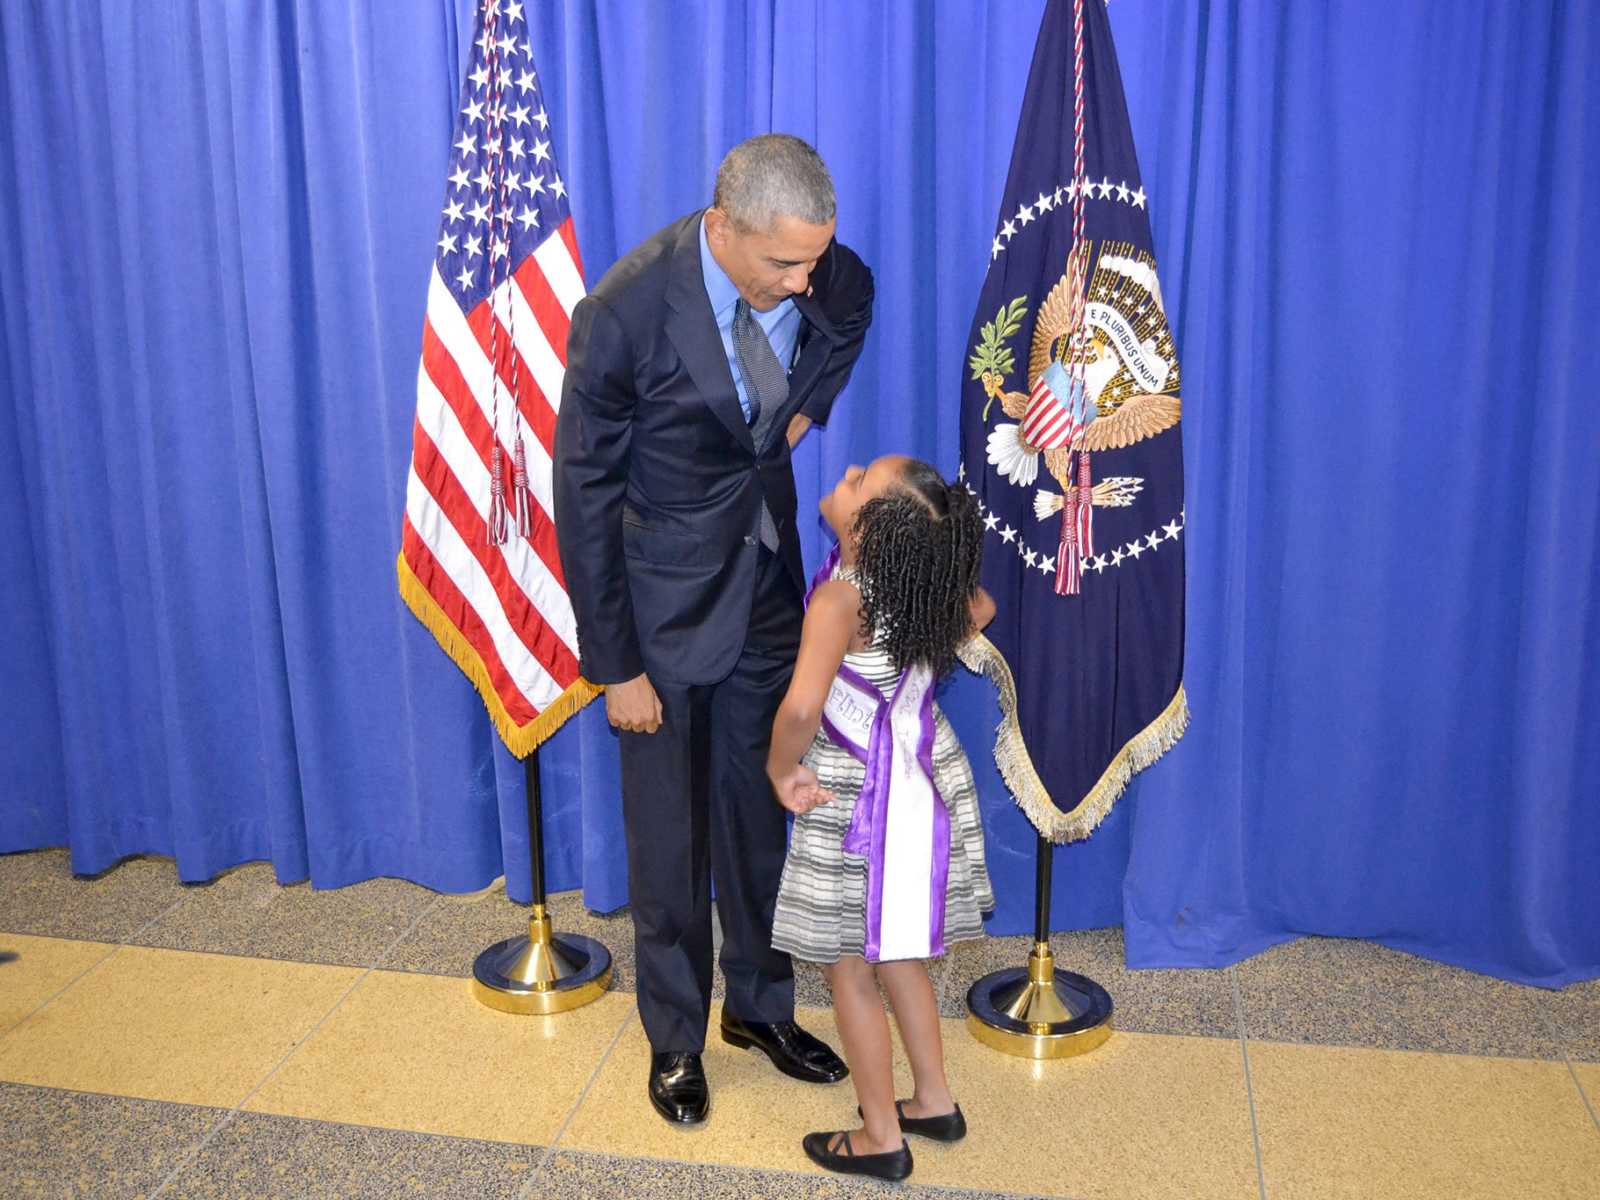 Little girl from Flint, Michigan standing looking up at Barack Obama with hand on her hips while he looks down at her